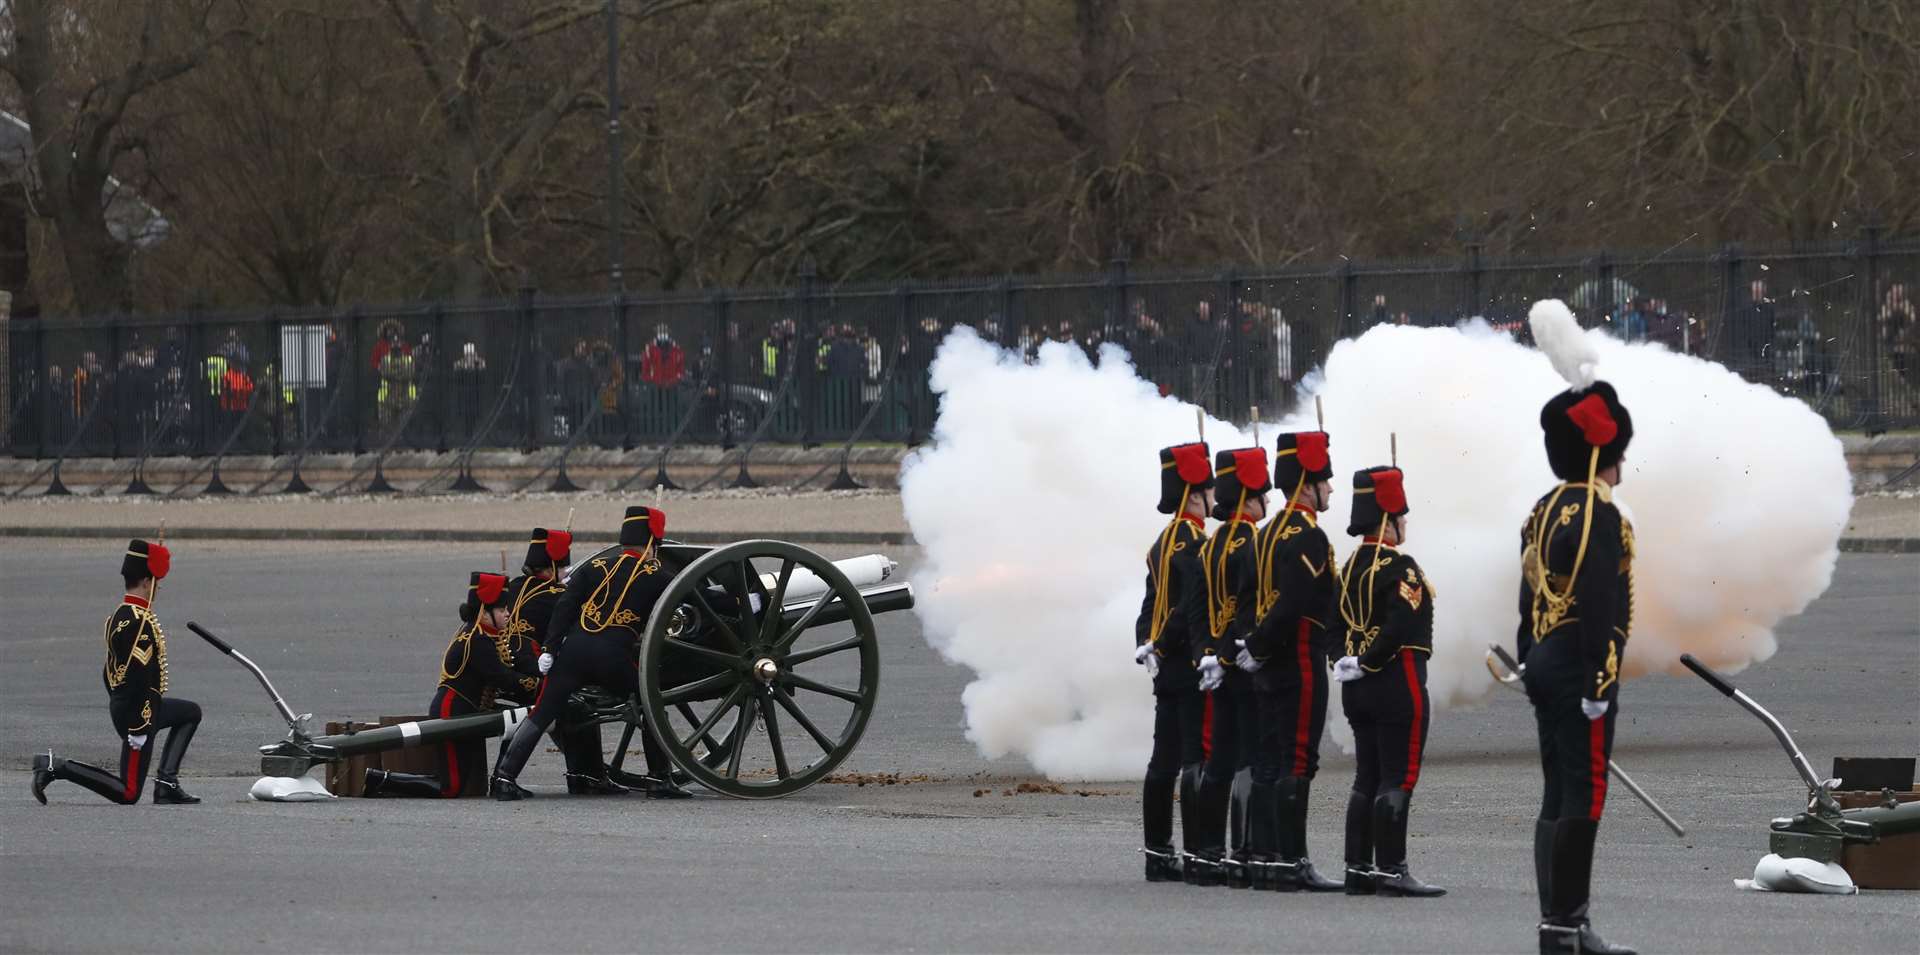 Members of the King’s Troop Royal Horse Artillery fire a 41-round gun salute at Woolwich Barracks (Alastair Grant/PA)